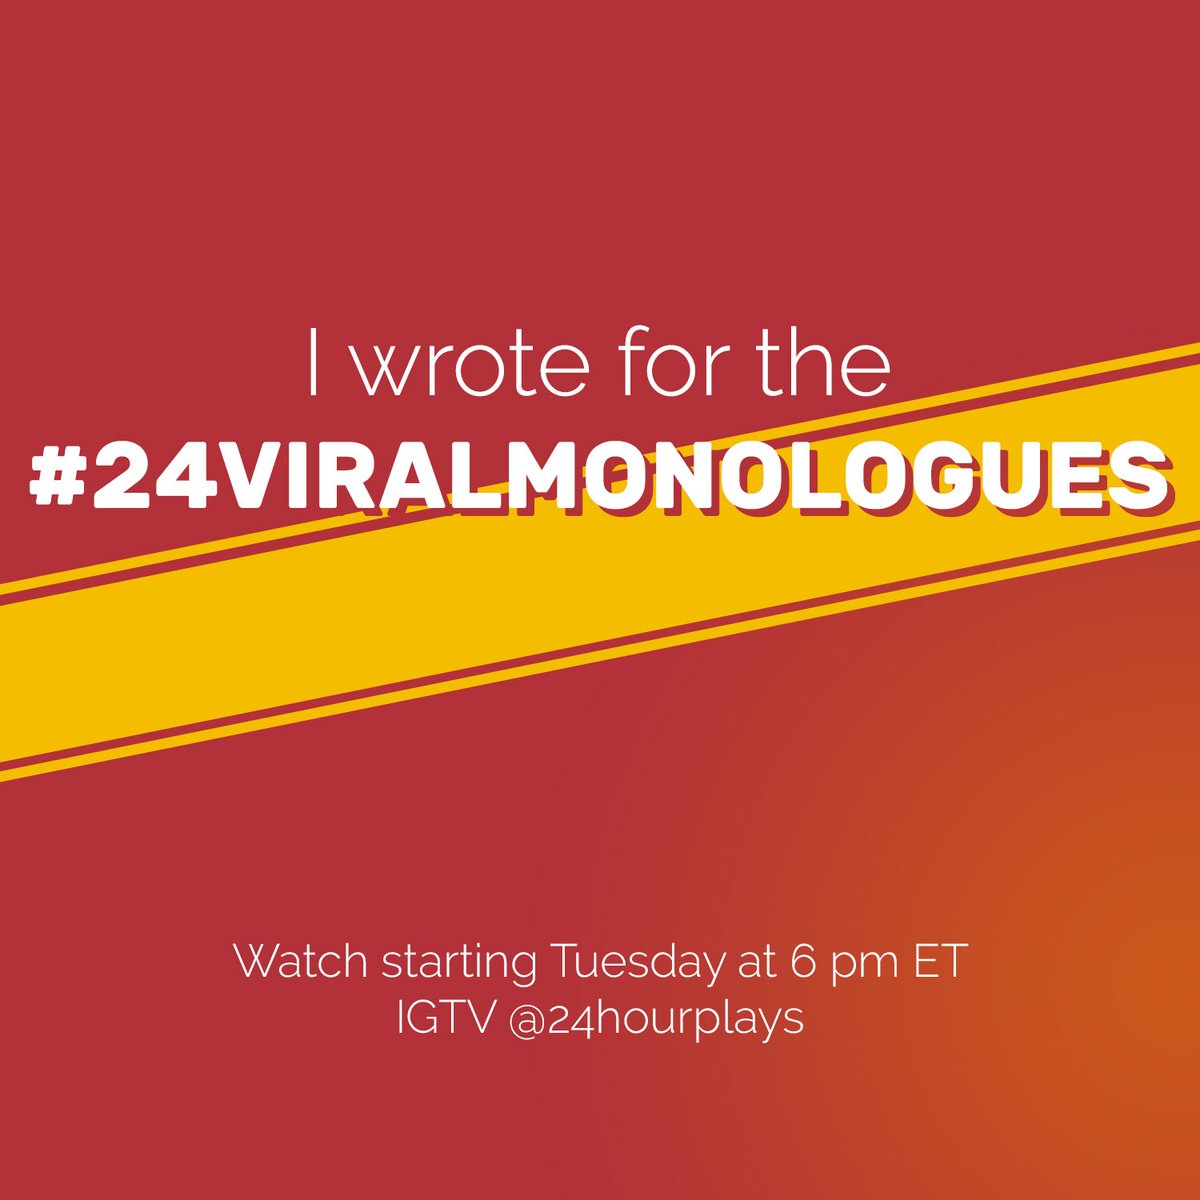 Thrilled to be part @24hourplays #24viralmonologues. 
Advocating for social justice: #FreeThemAll4PublicHealth
 #FreeThemAll 
#DecarcerateCOVID19
 #ClemencyCoast2Cost 
#ClemencyNow